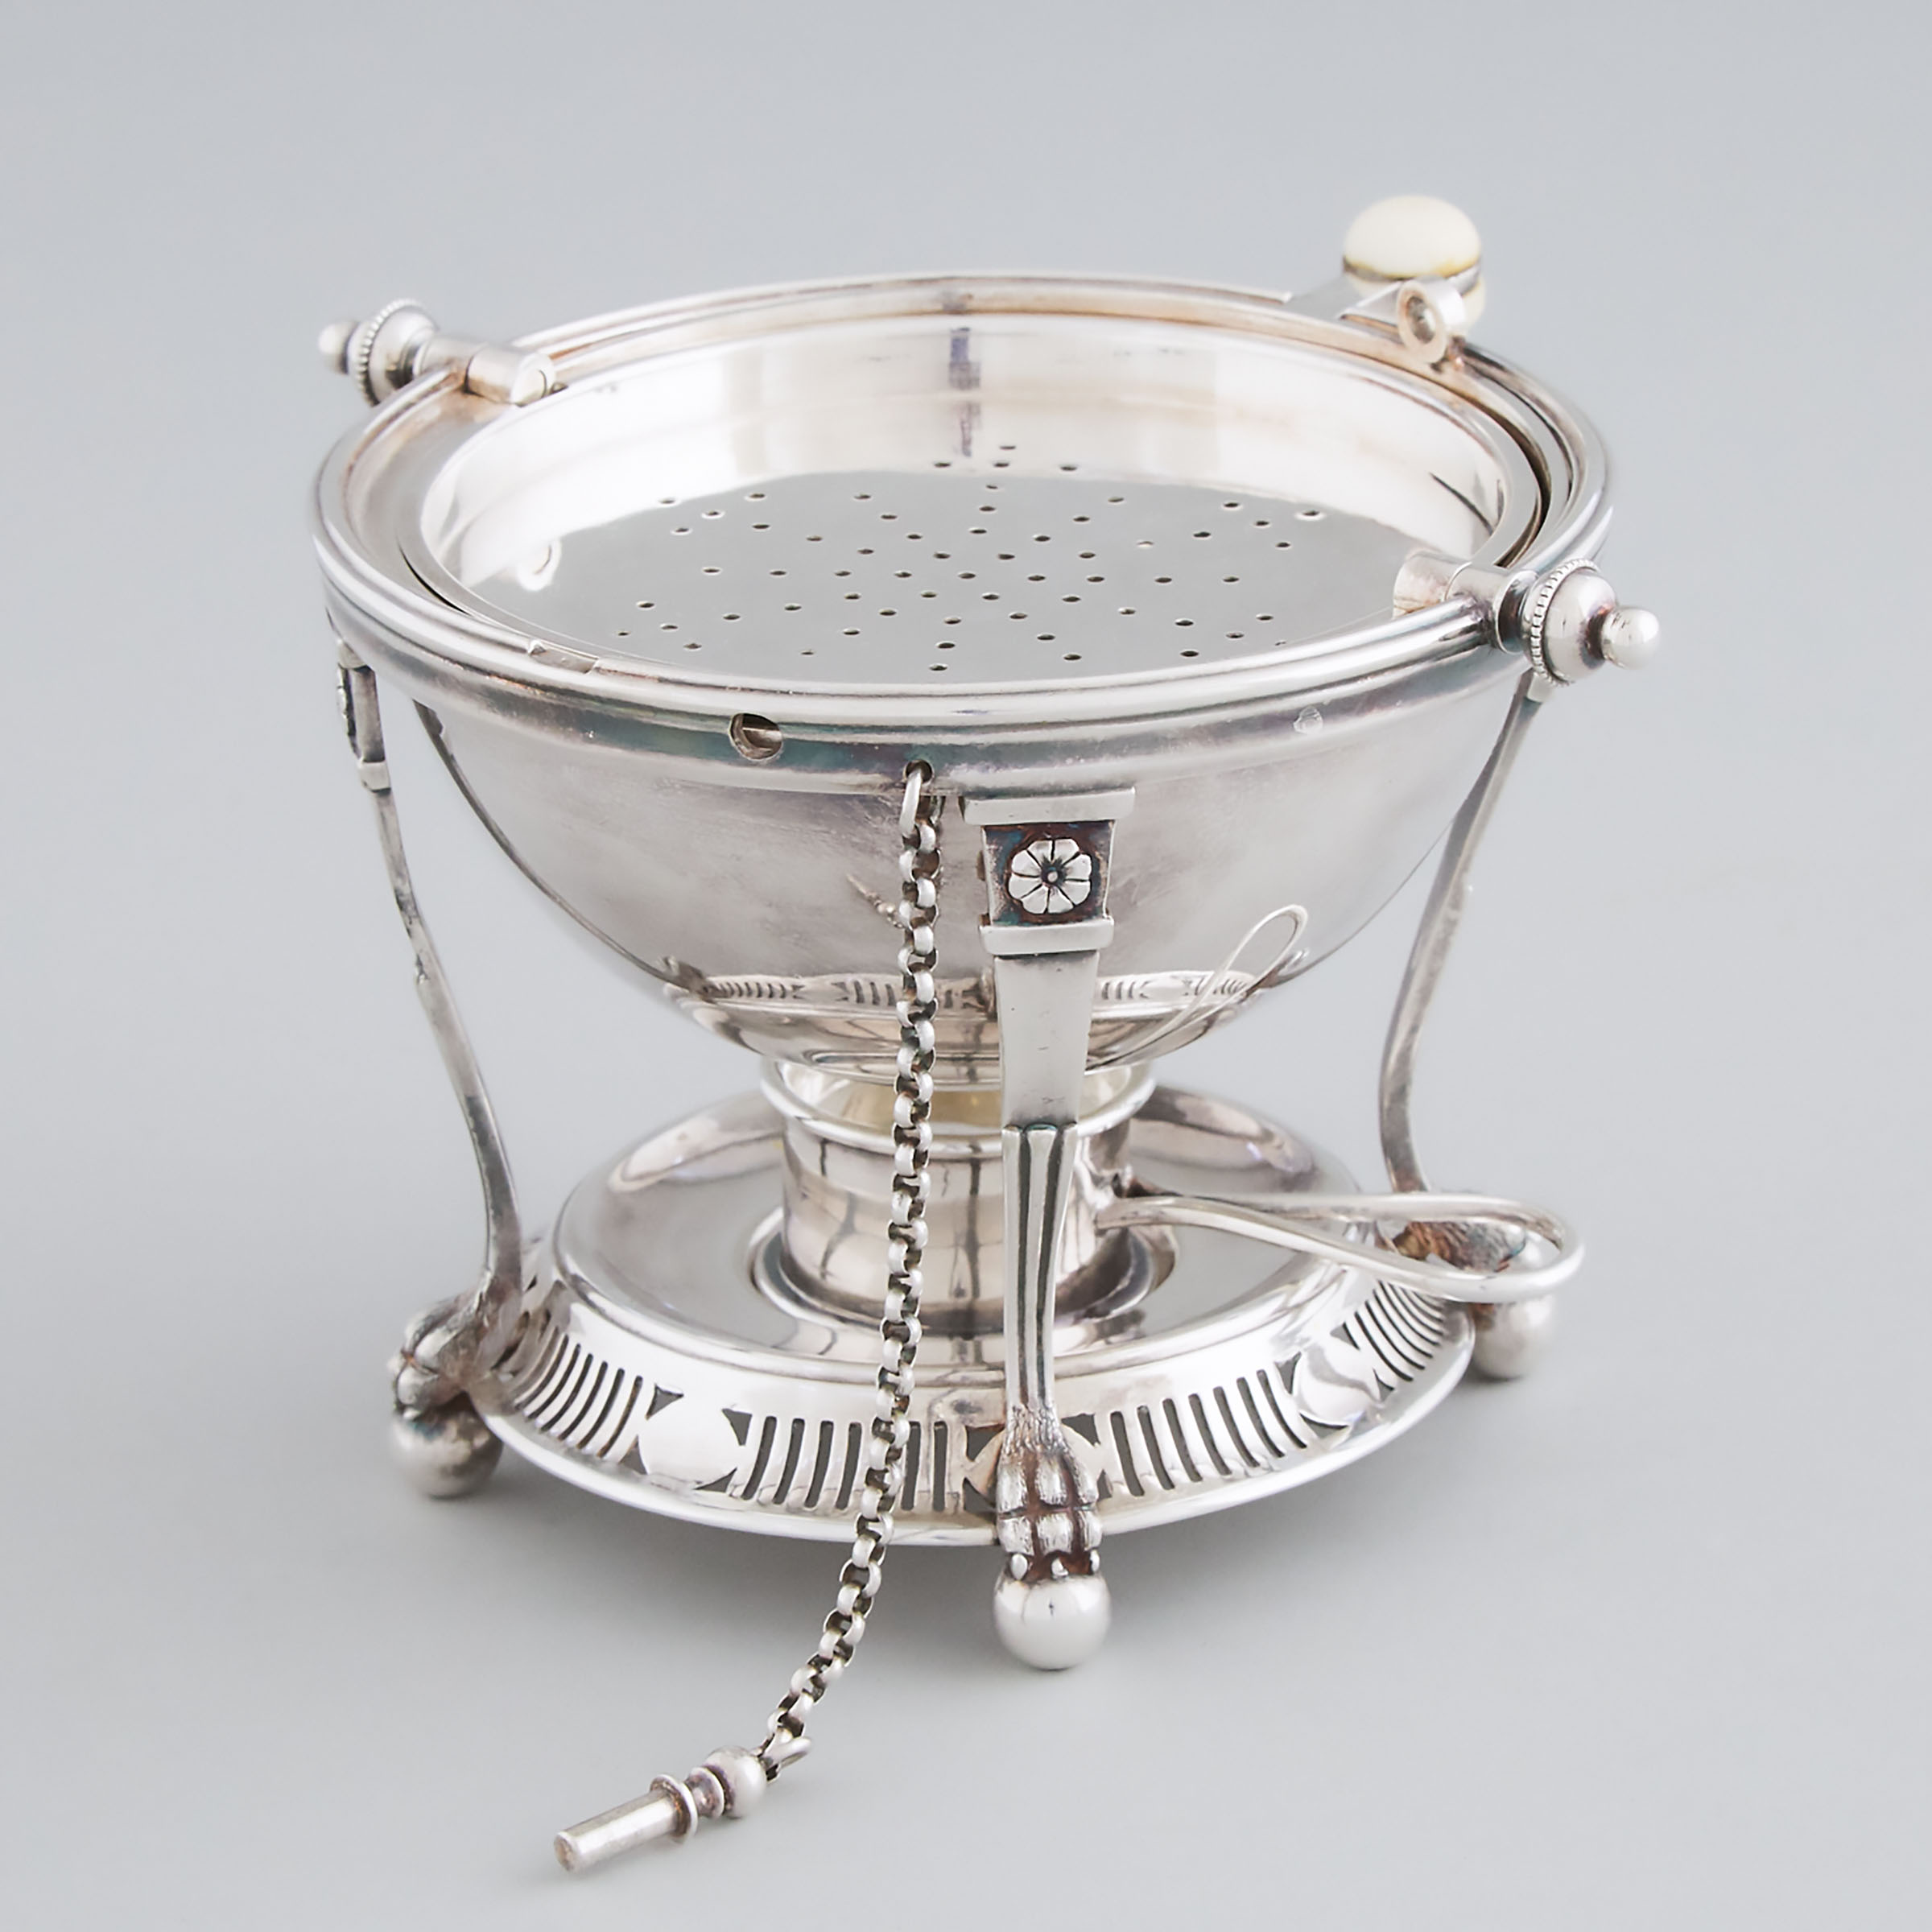 English Silver Plated Small Breakfast Dish, William Hutton & Sons, Sheffield, early 20th century